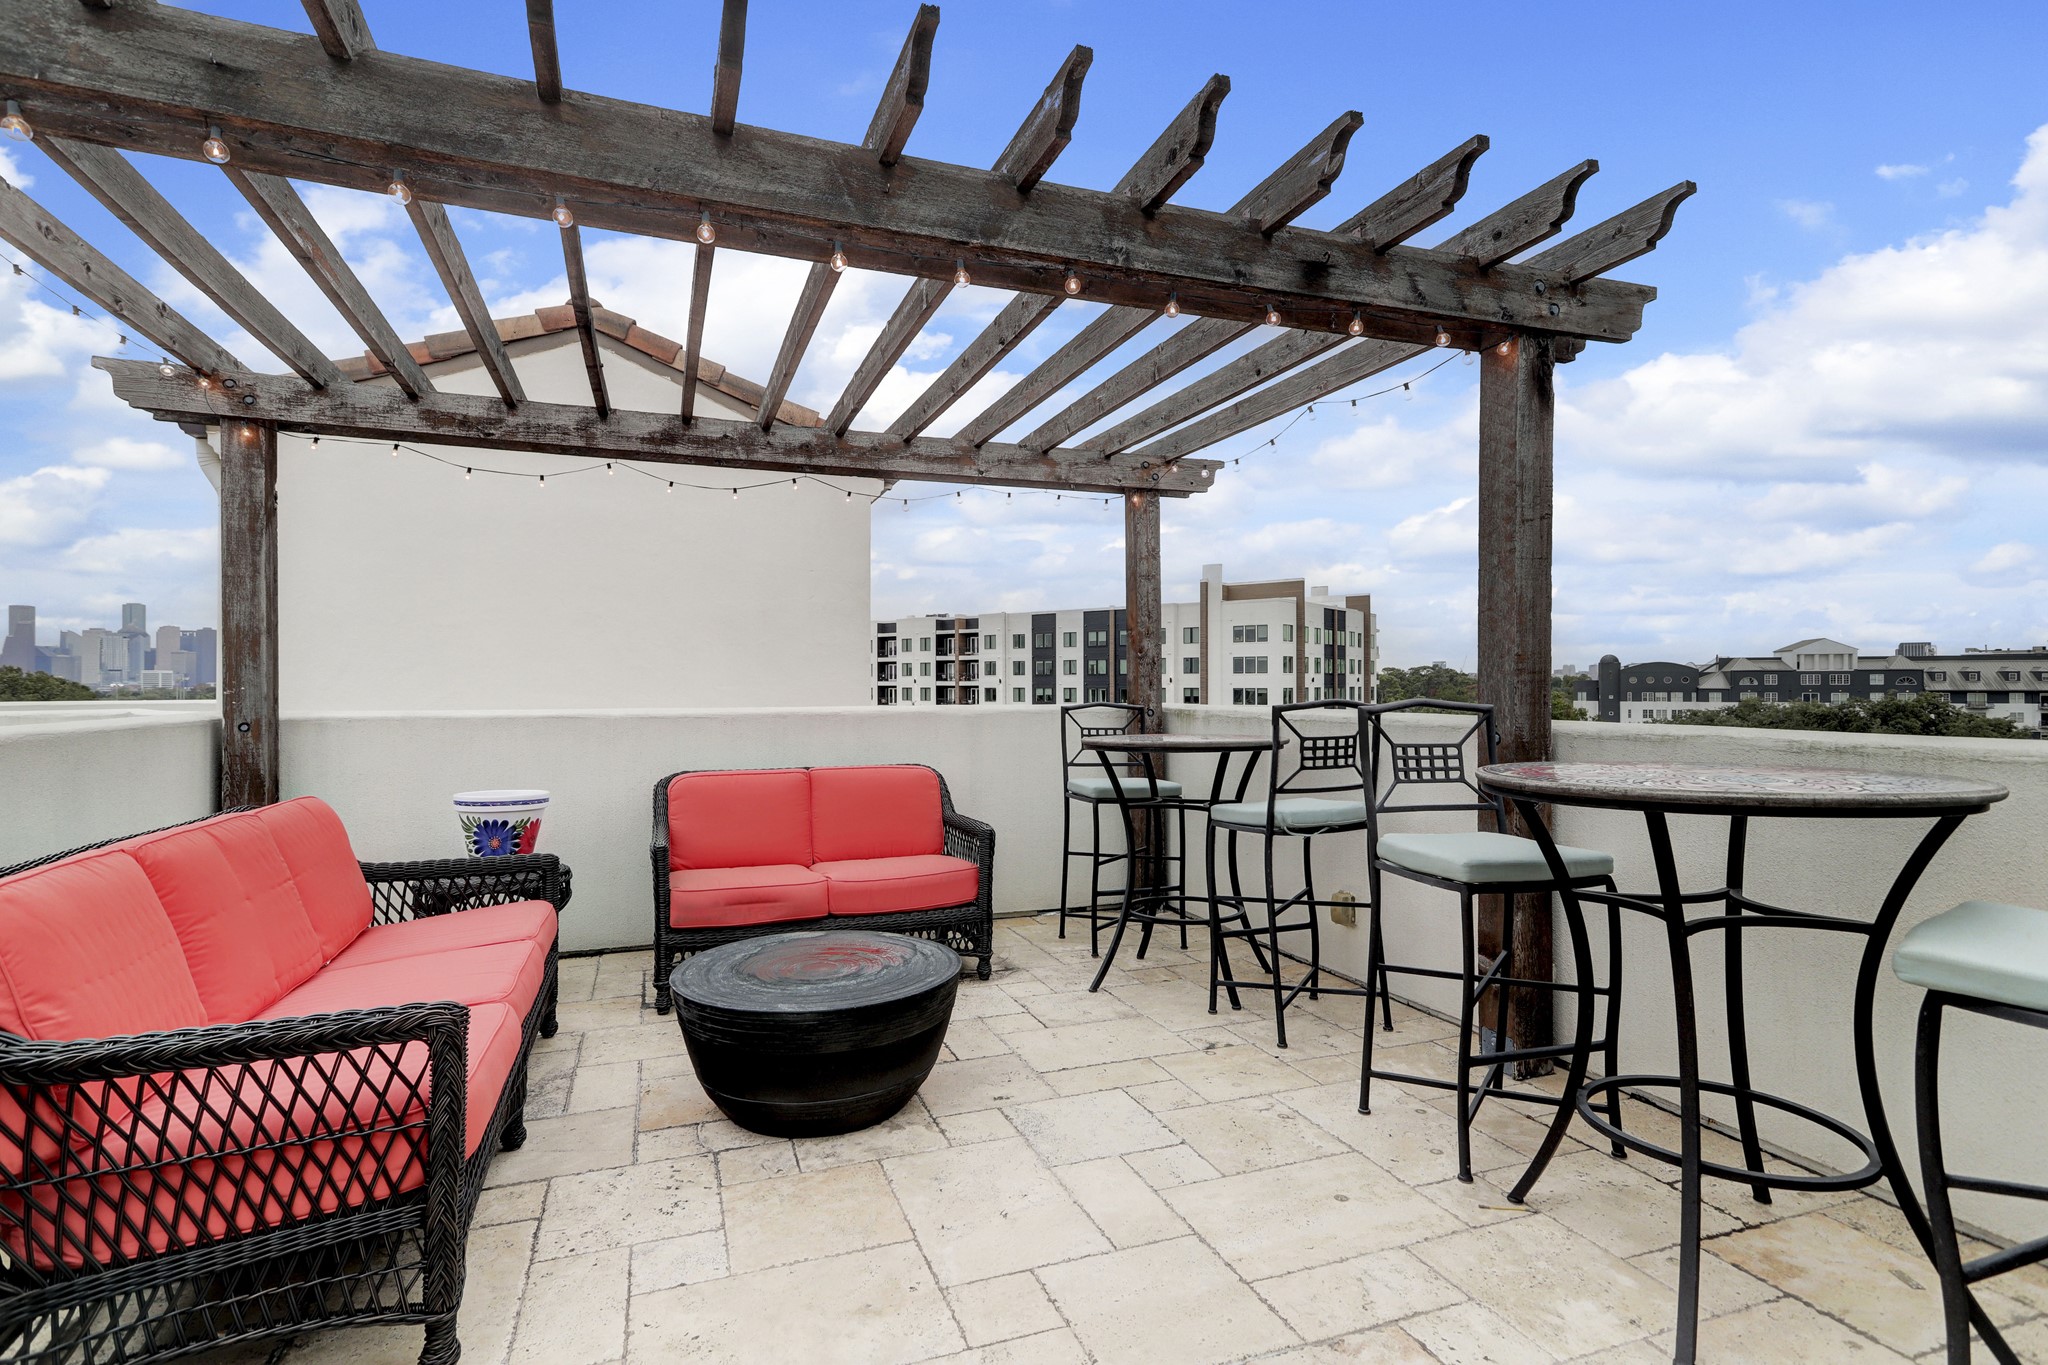 Welcome to your home in Caceres on Calle Montilla showcasing this elegant Spanish-style home. This home has an incredible floor plan that features multi-level living, roof top terrace, balconies, garage, and more!